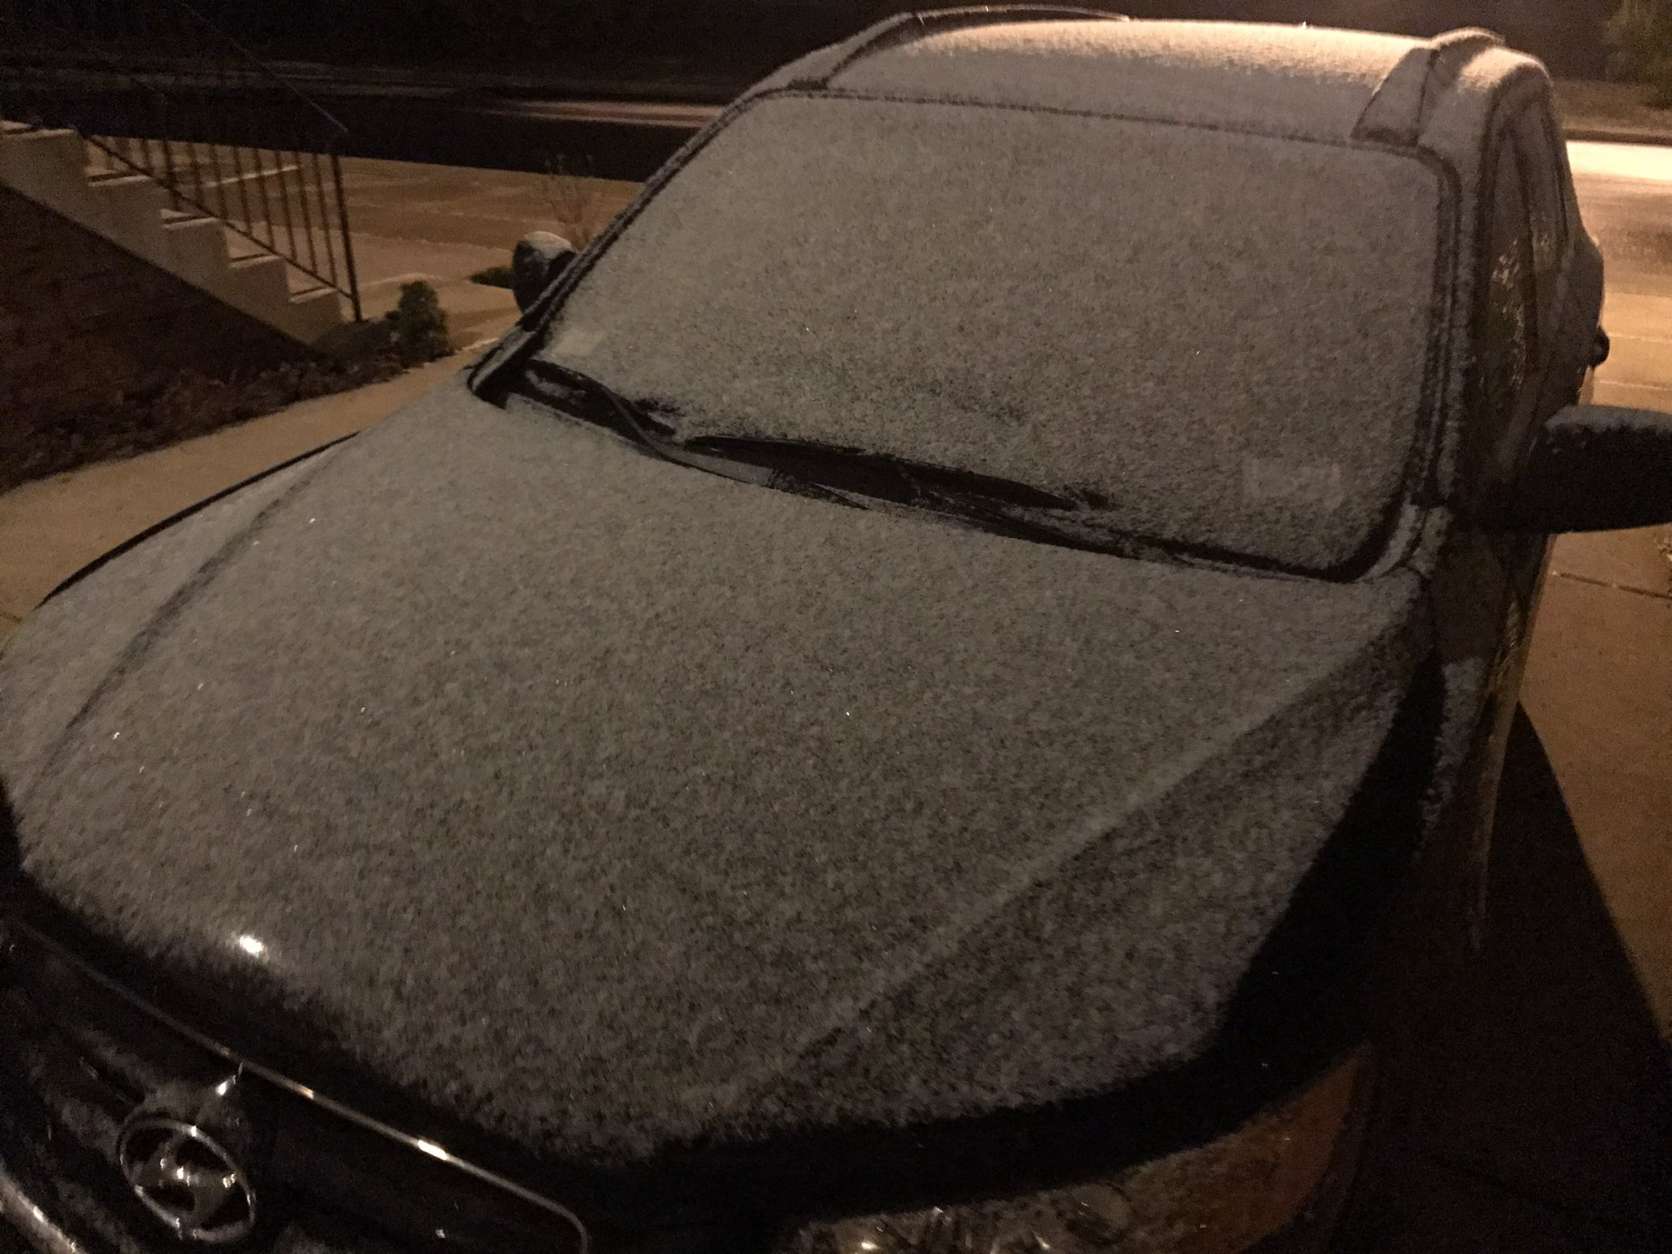 The snow made a dusting on cars in Loudoun County. (WTOP/Neal Augenstein)